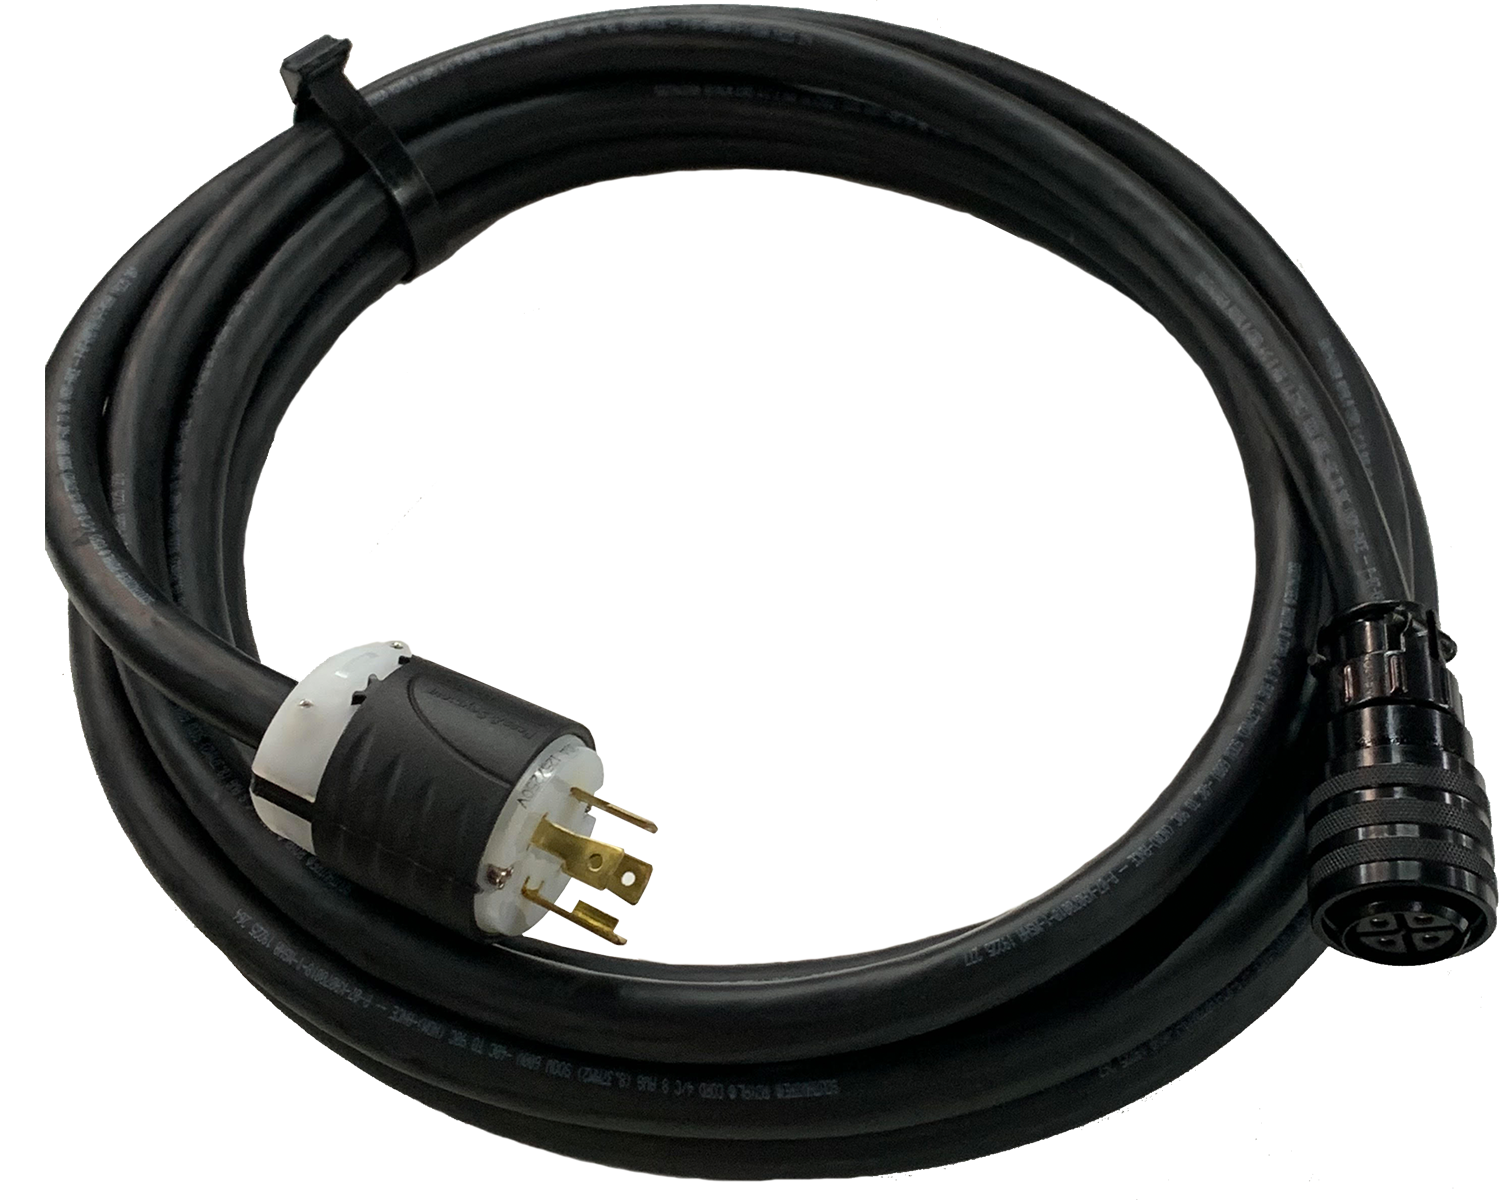 GenerLink 40 Cord with 14-50 Plug (unit not included)